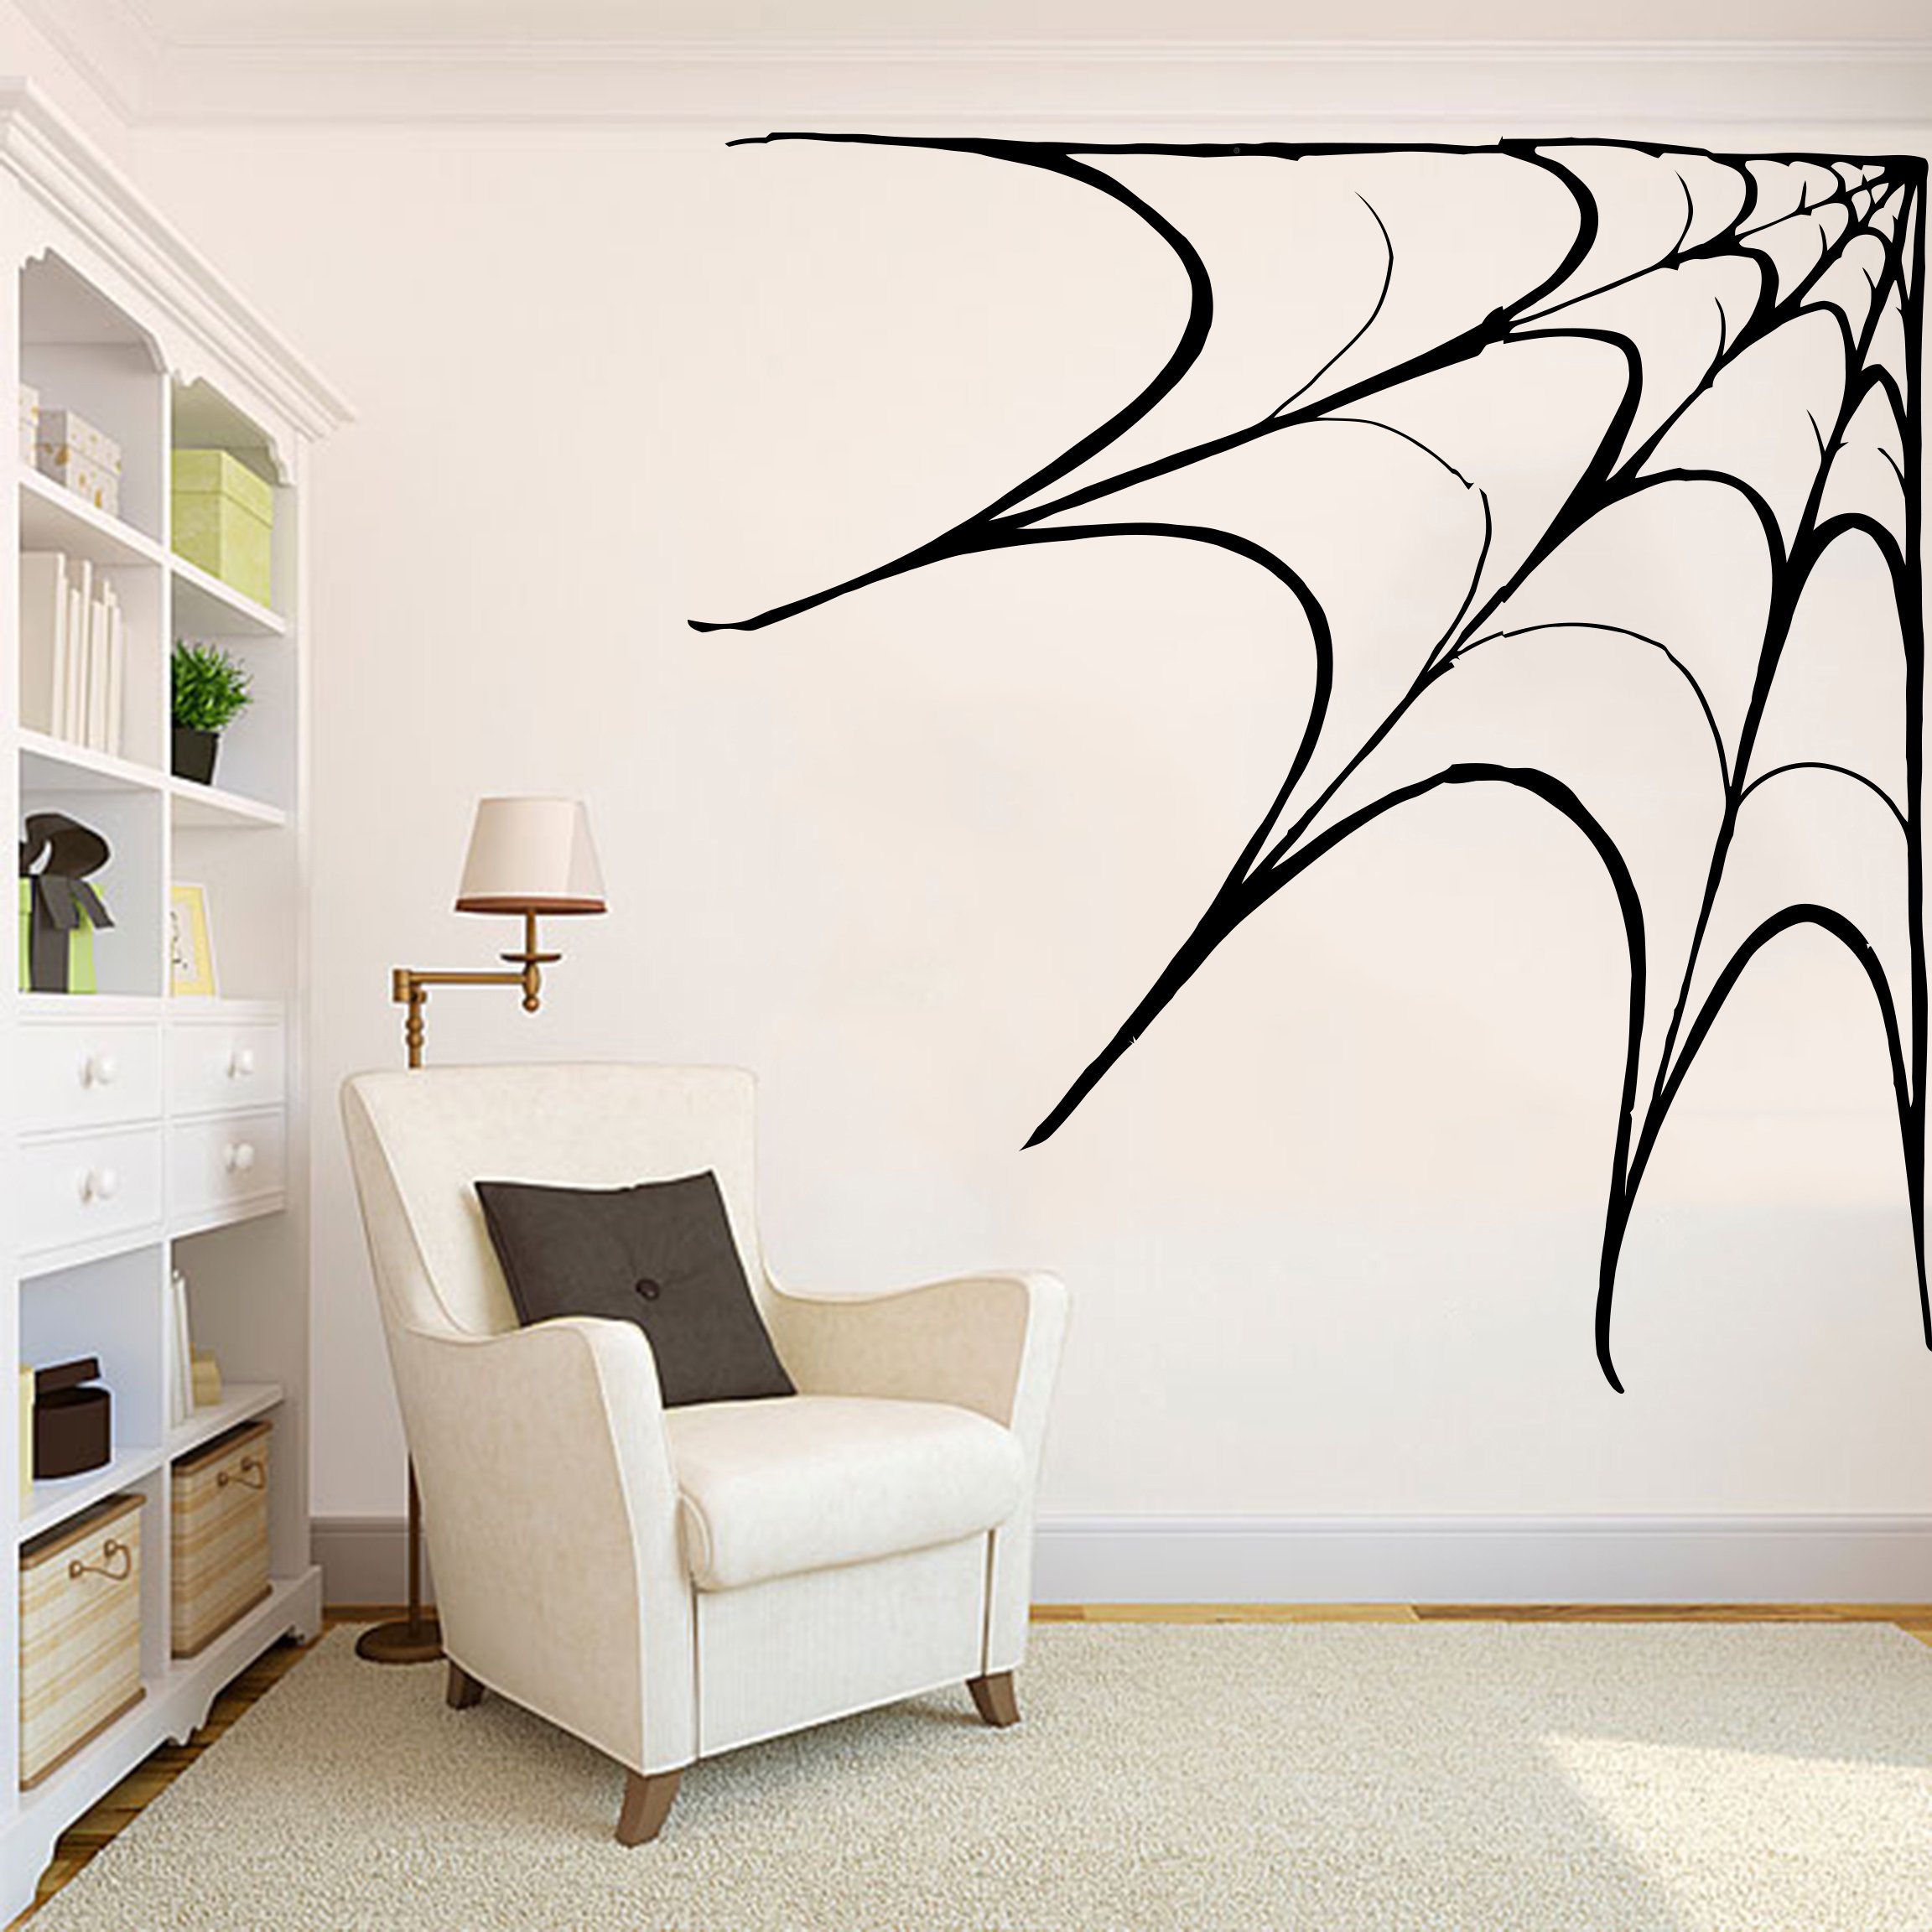 Halloween: Trick or Treat Mural - Removable Wall Adhesive Wall Decal Giant 48W x 39H